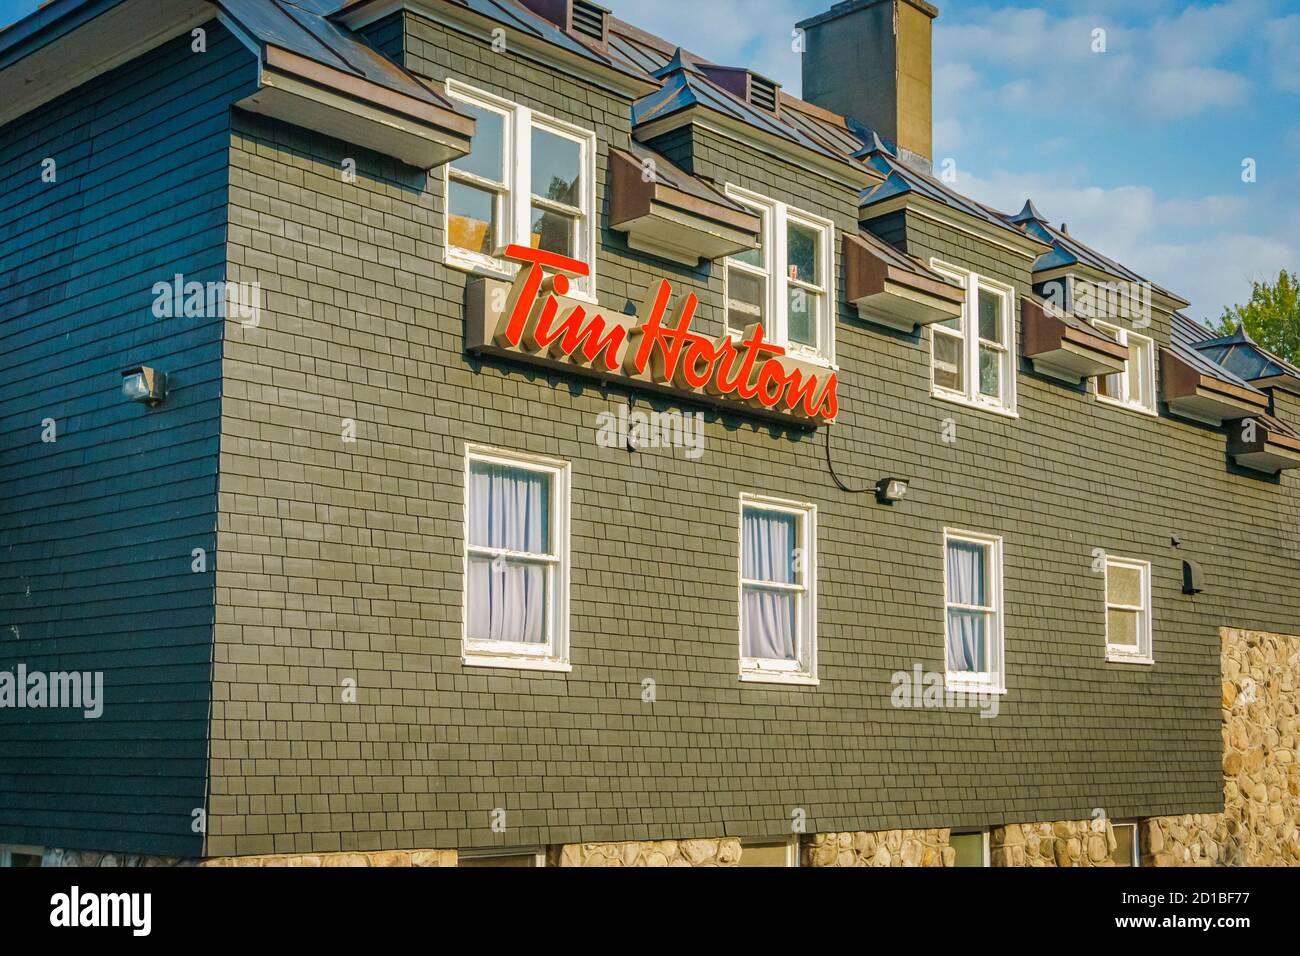 Niagara Falls, Canada, July 2015 - Back of an old building operating as a Tim Hortons restaurant  Stock Photo